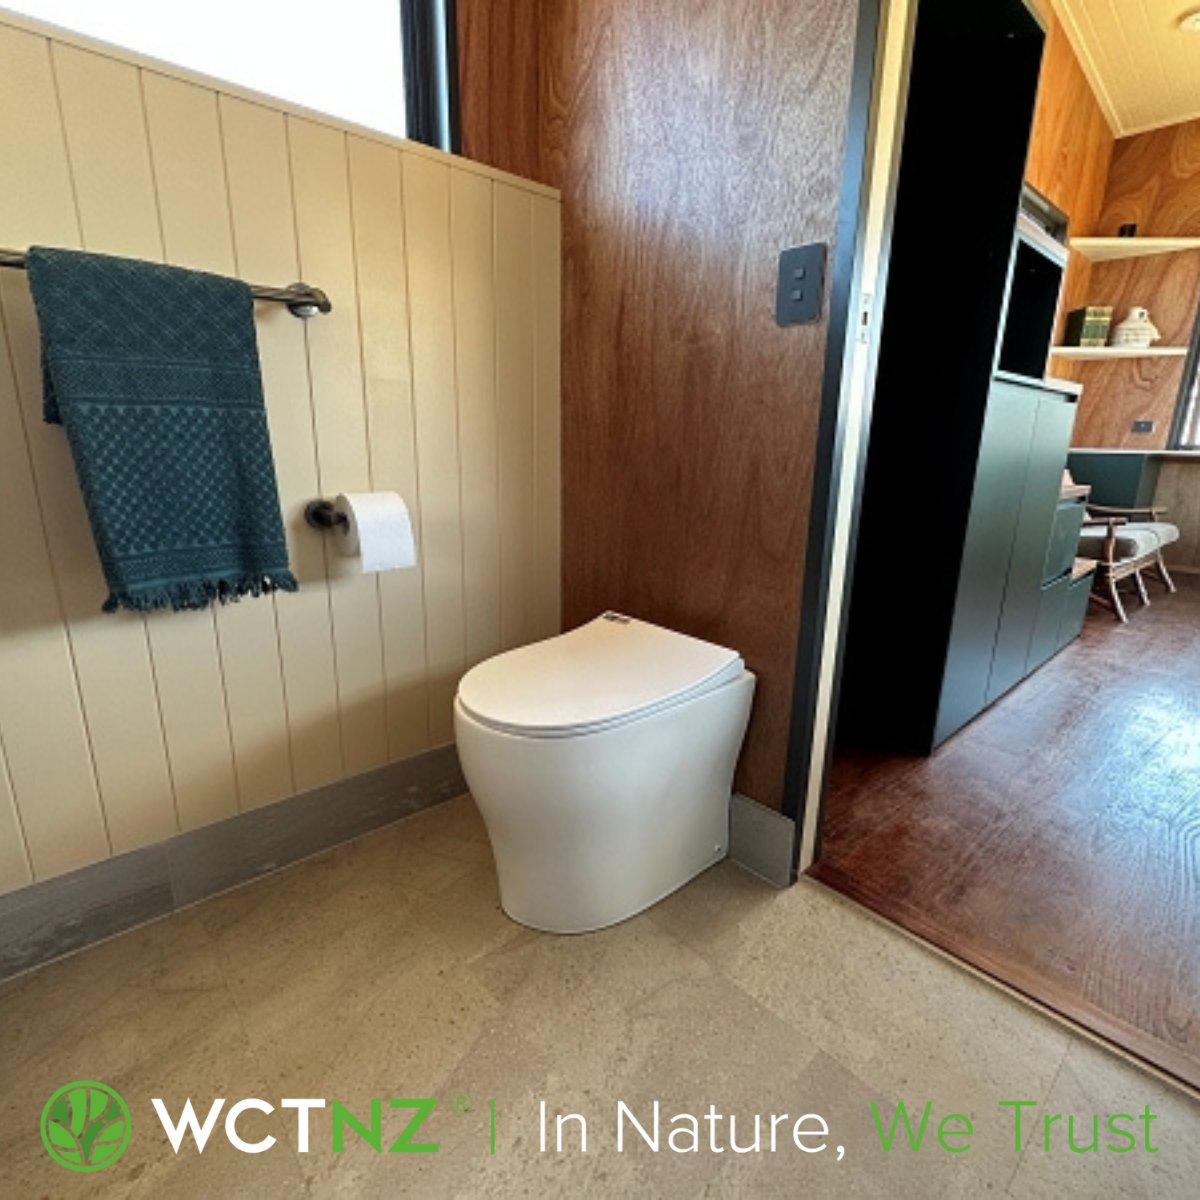 Easy fit for a tight spot 👌 Nature Loo Alectura Premium with Porcelain Palisade pedestal 🍃

#wctnz #compostingtoilet #natureloo #offgridnz #tinyhomenz #tinyhousenz #ecotoilet #nzbach